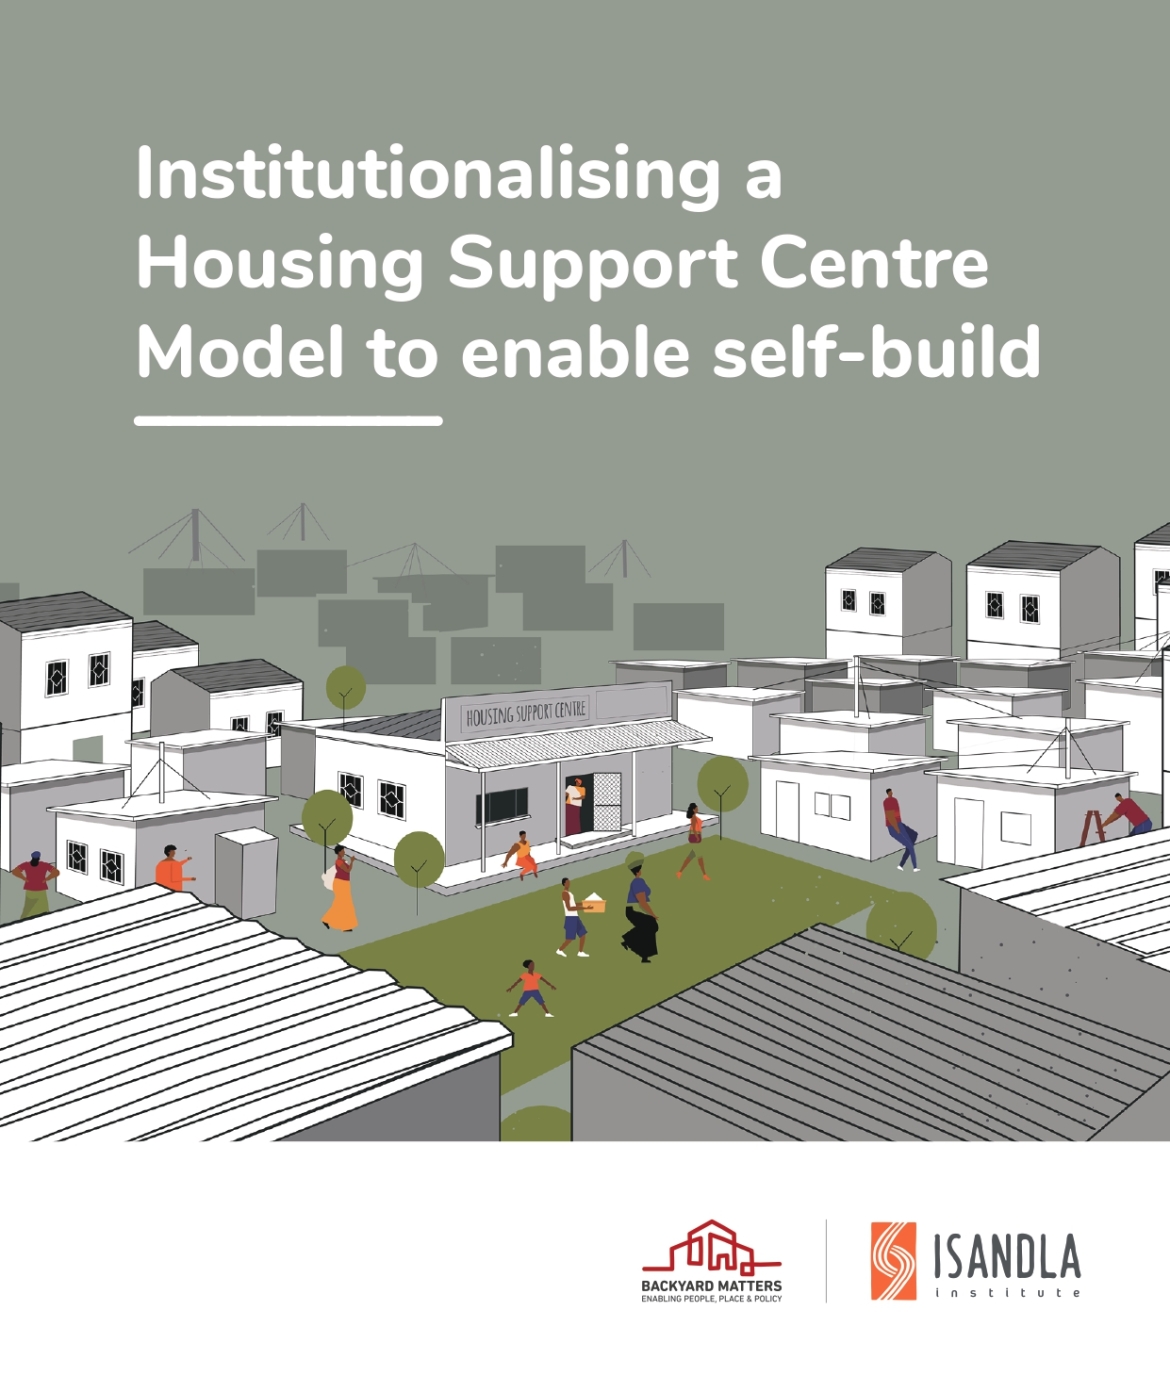 Institutionalising a Housing Support Centre Model to enable self-build